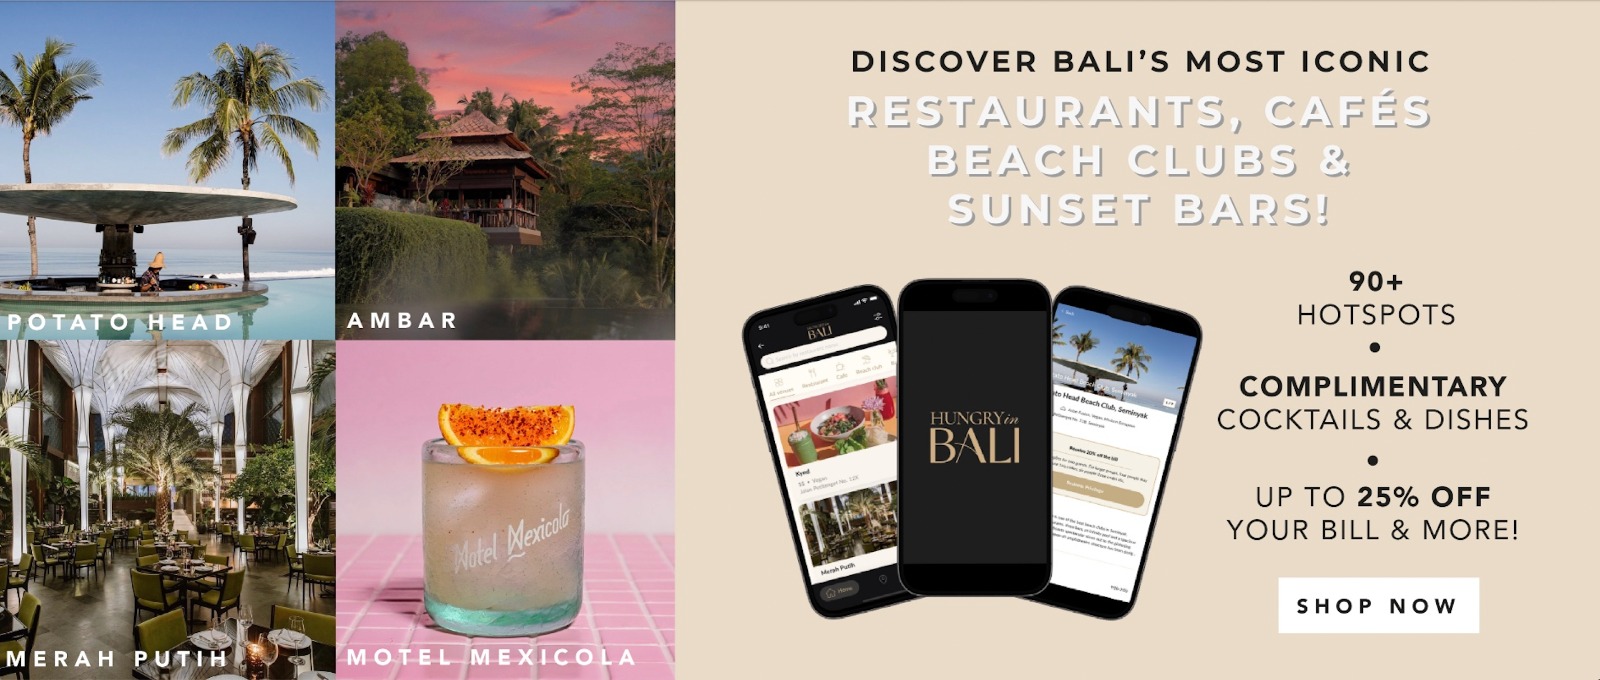 hungry in bali - bali dining guide